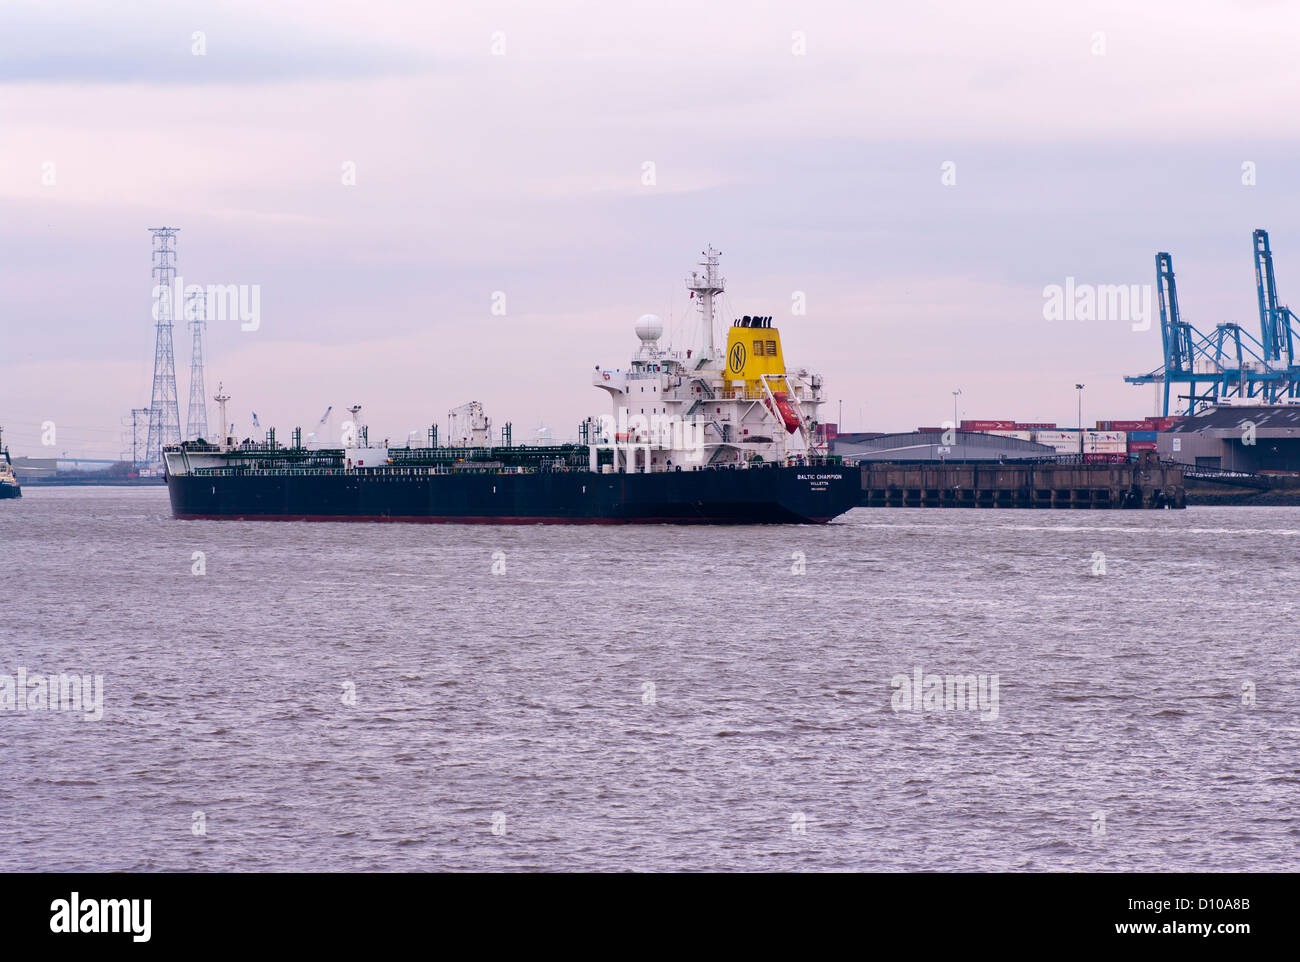 Tanker Tankers High Resolution Stock Photography and Images - Alamy